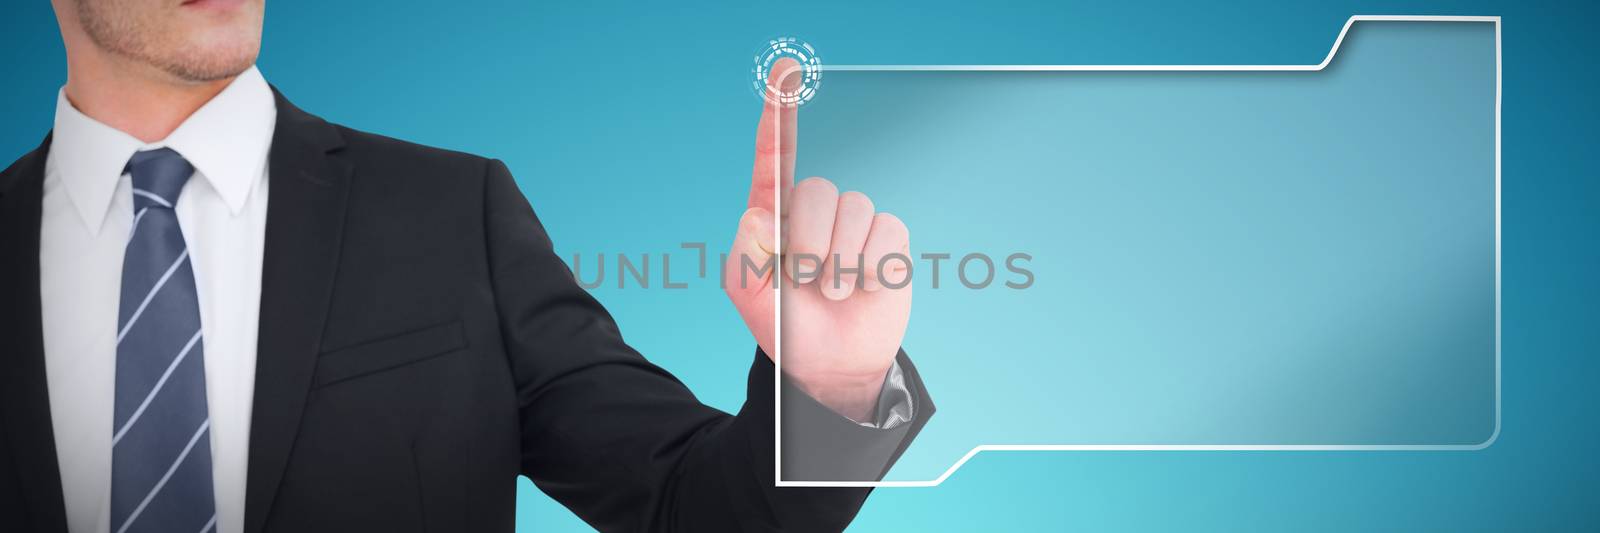 Unsmiling businessman pointing his finger against abstract blue background